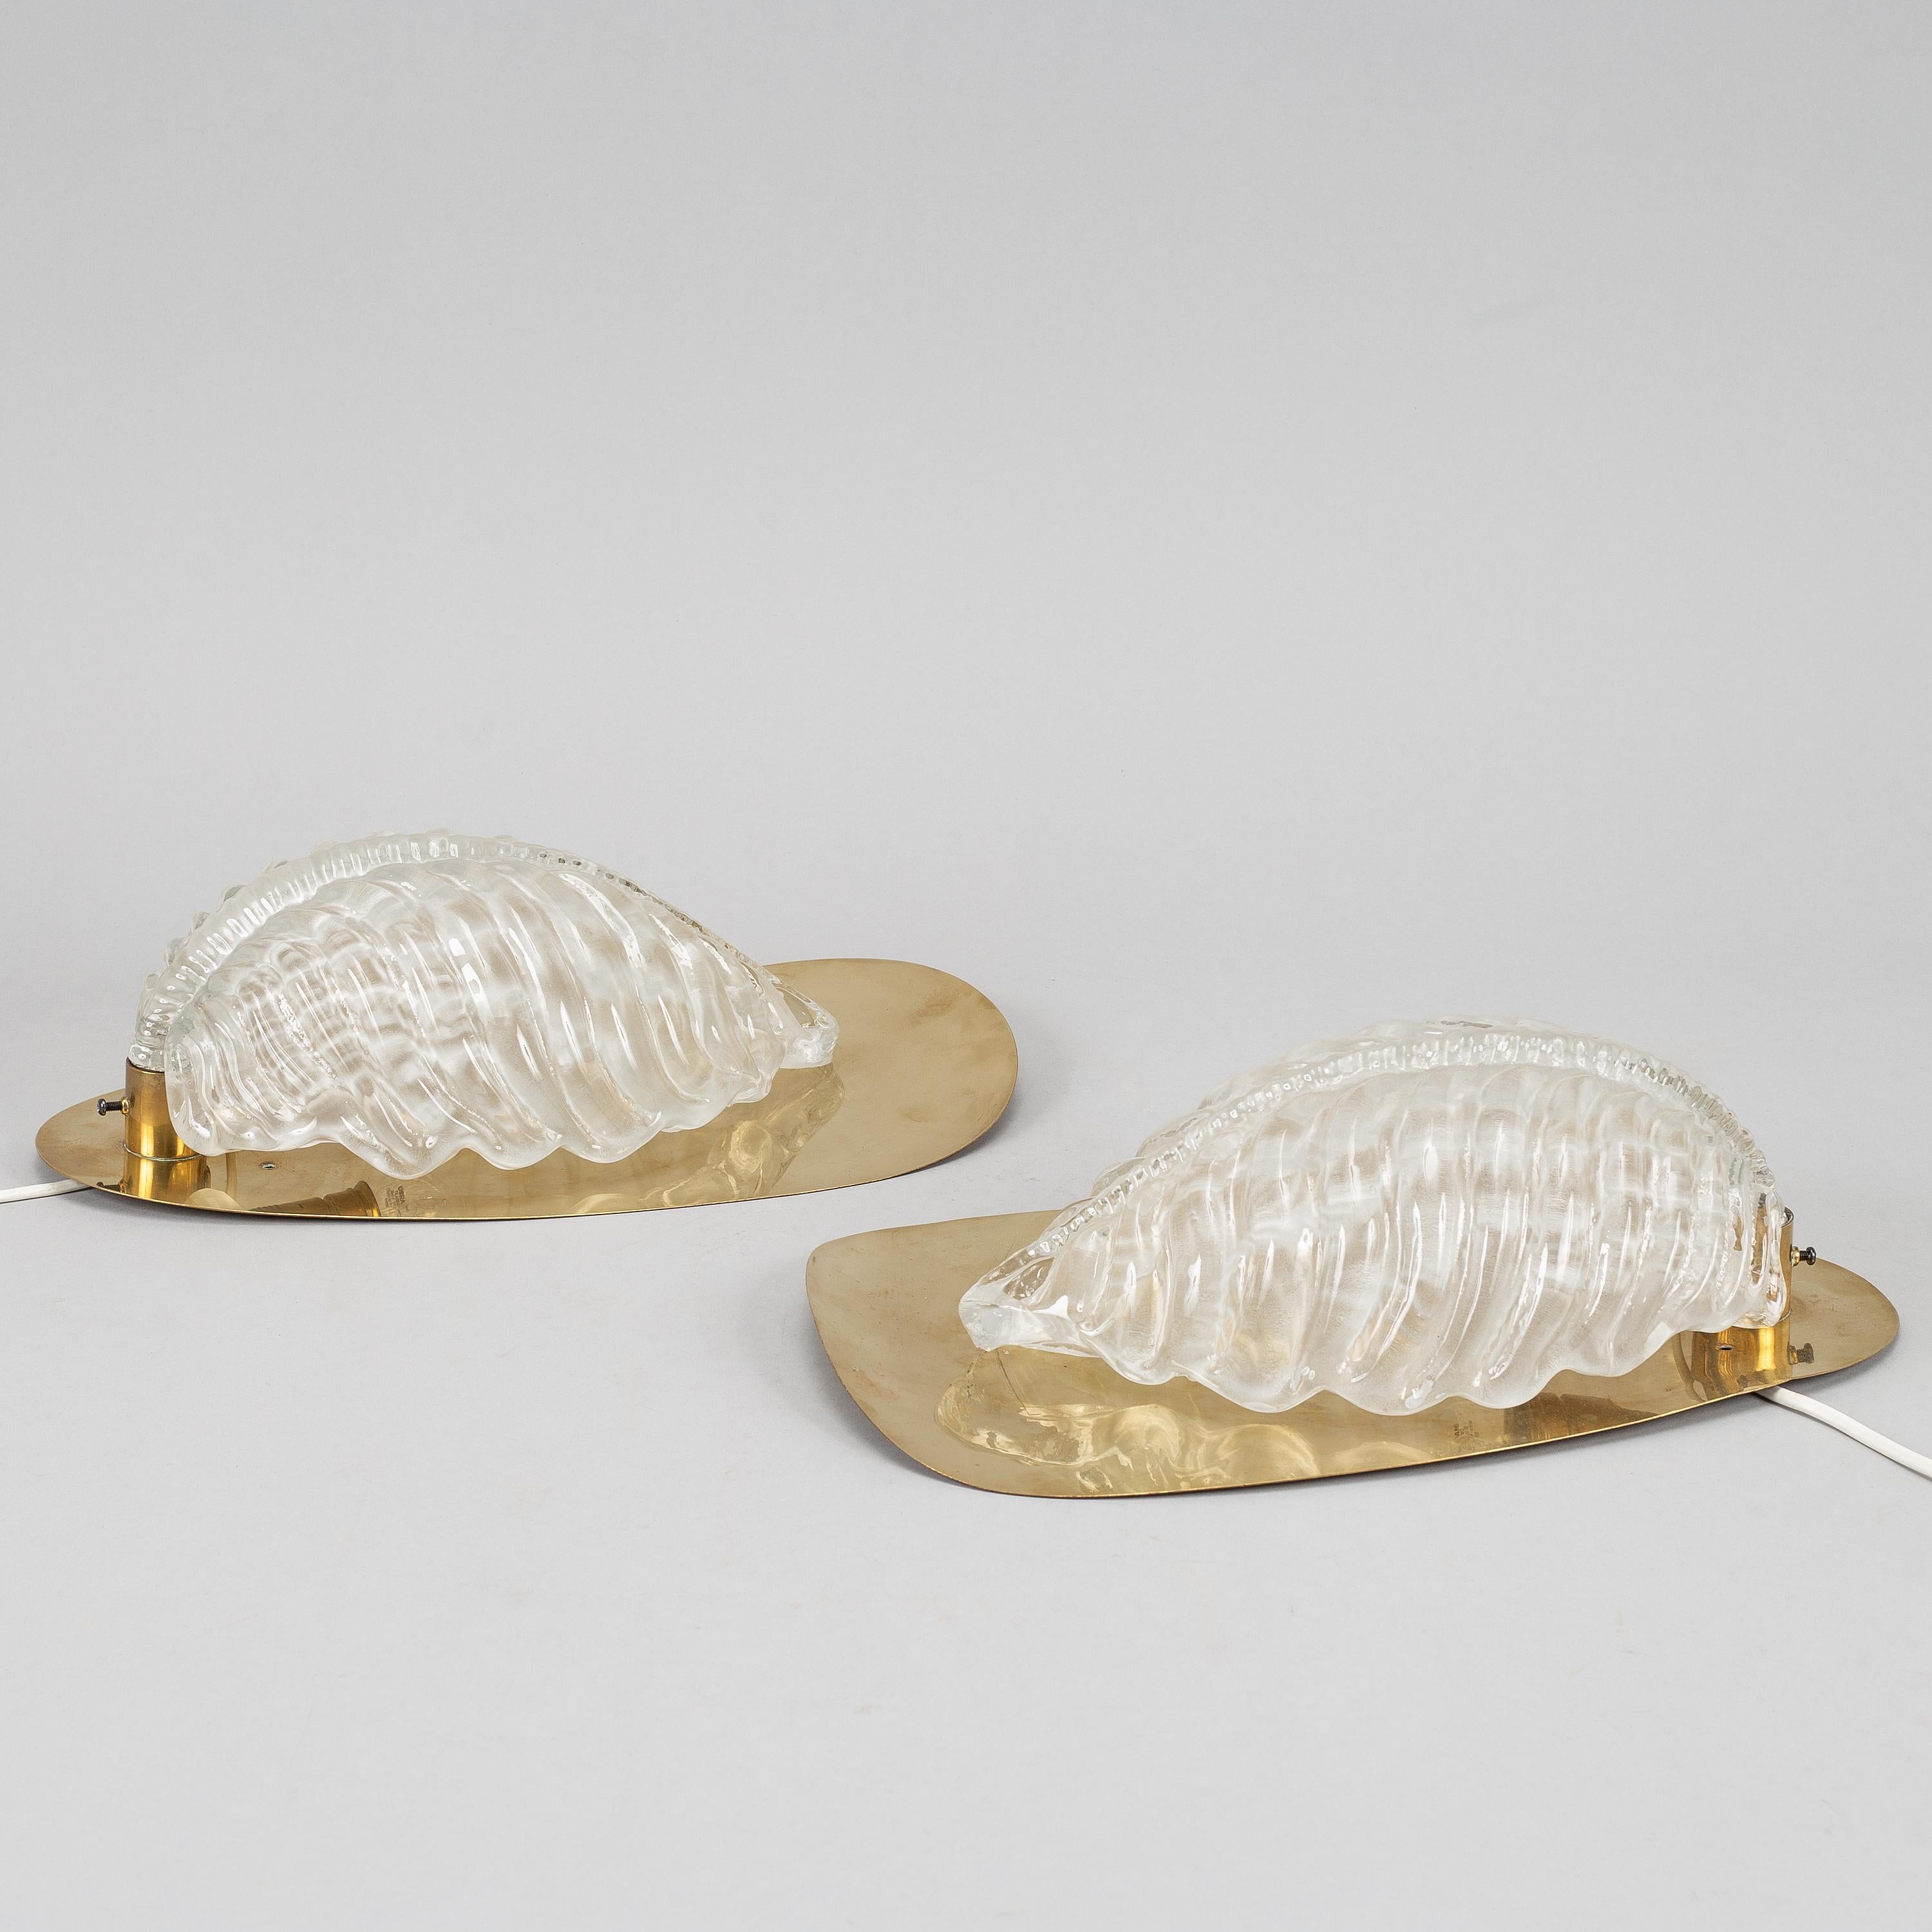 Fritz kurz sconces leaf shaped brass and glass Orrefors 1960s For Sale 2